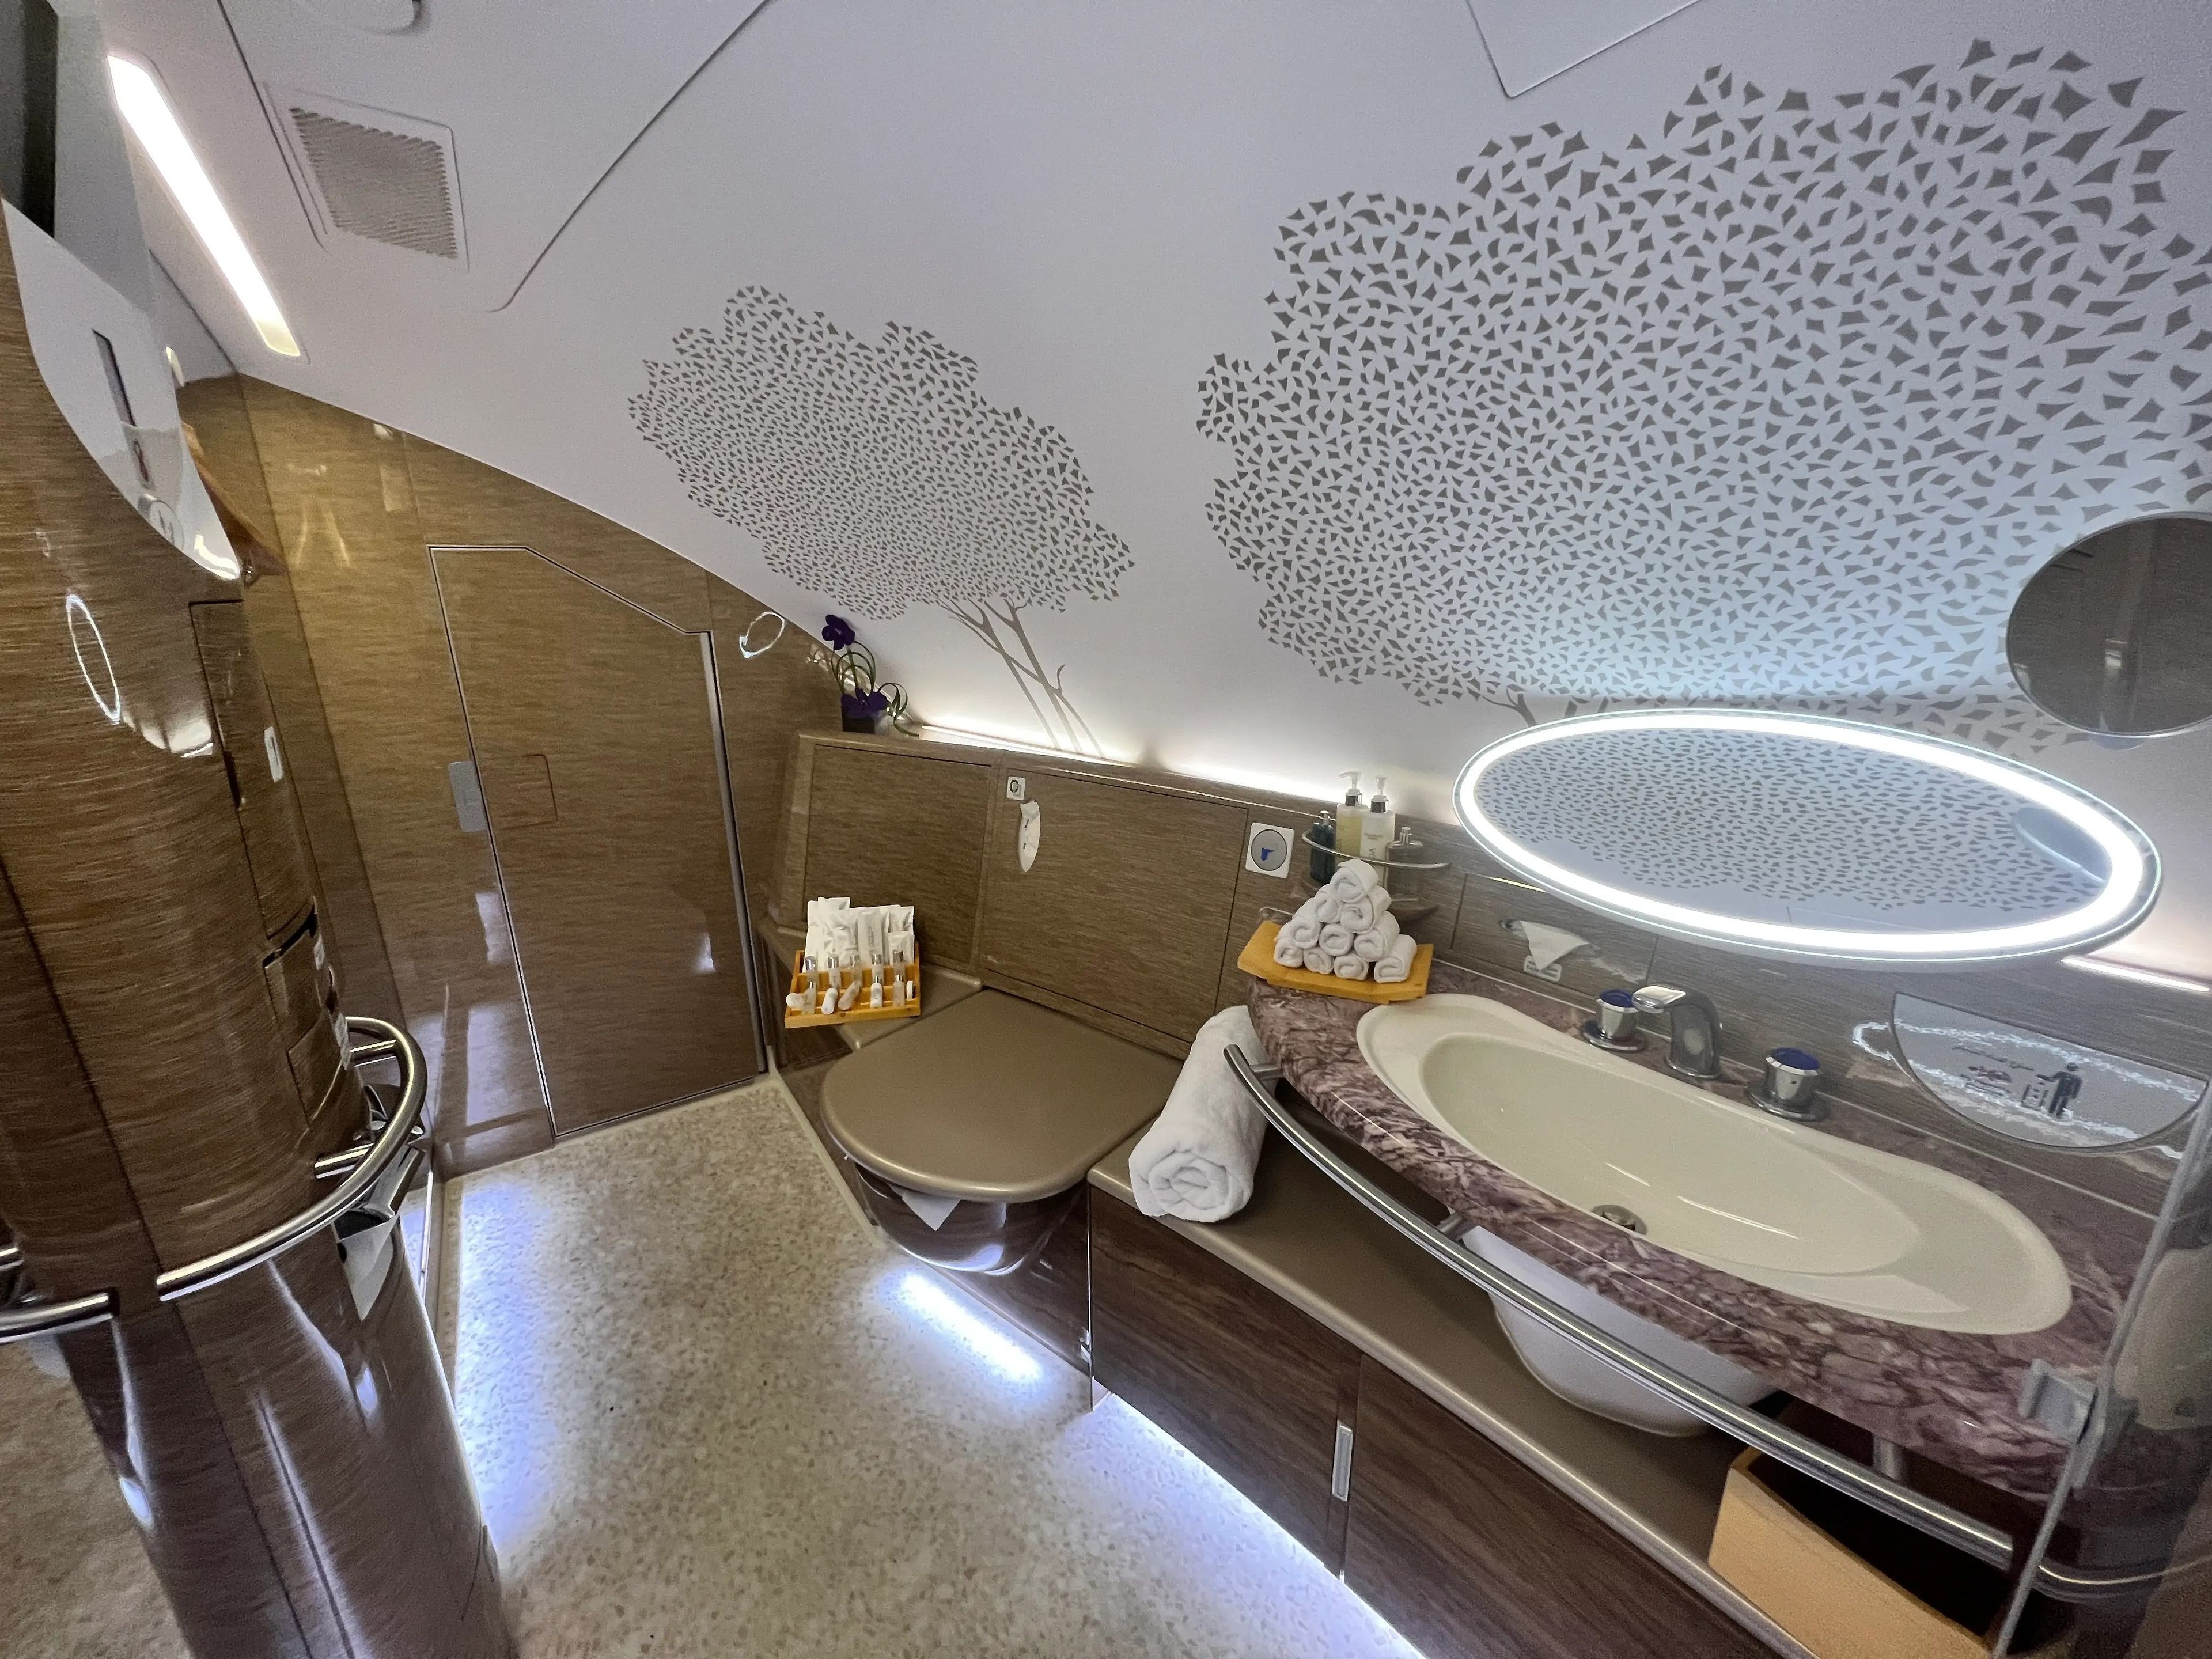 A wide-angle view of a bathroom onboard the Emirates A380 first class, with a big sink, toilet, and ornate tree designs on the white wall.